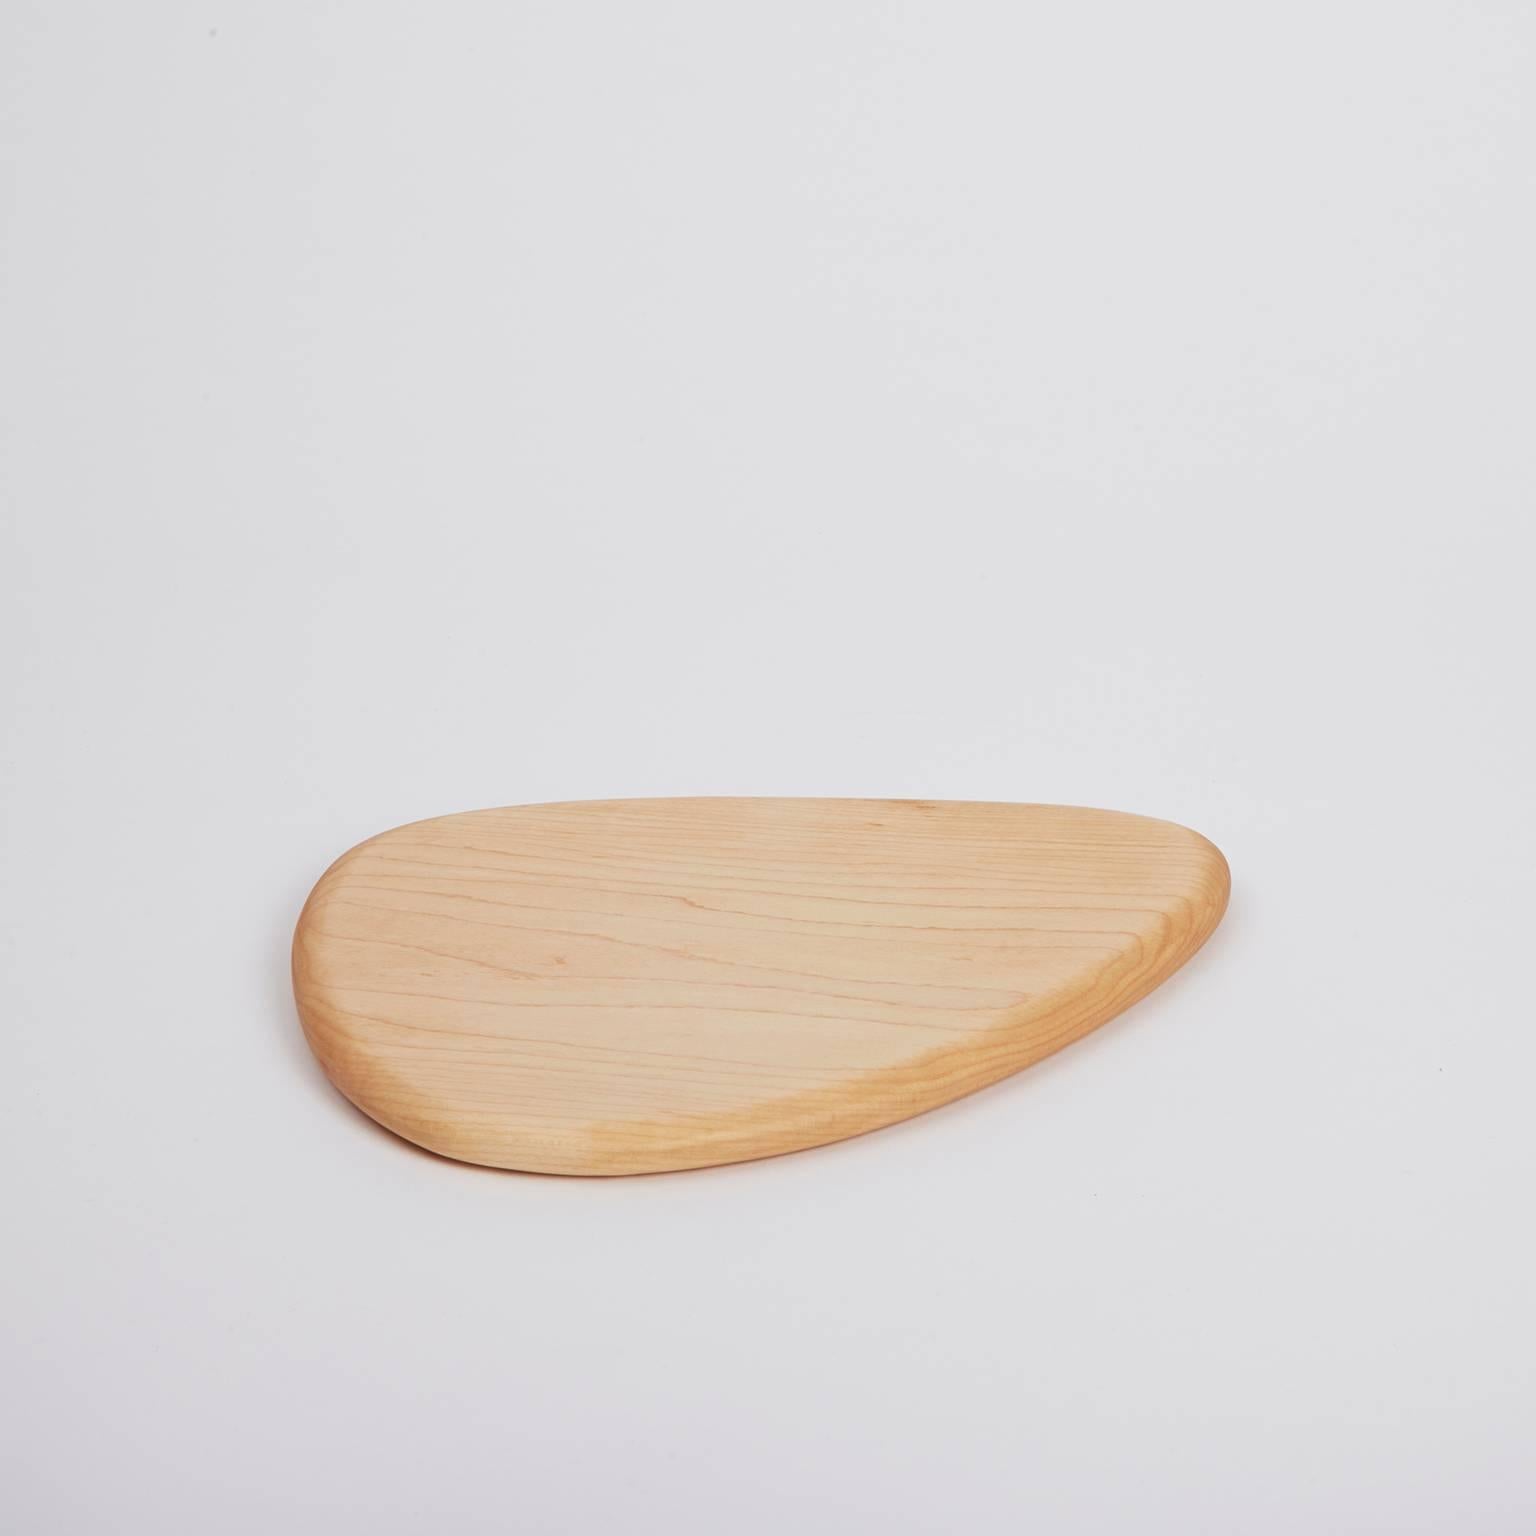 Other Small Egg Maple Pebble Cutting Board